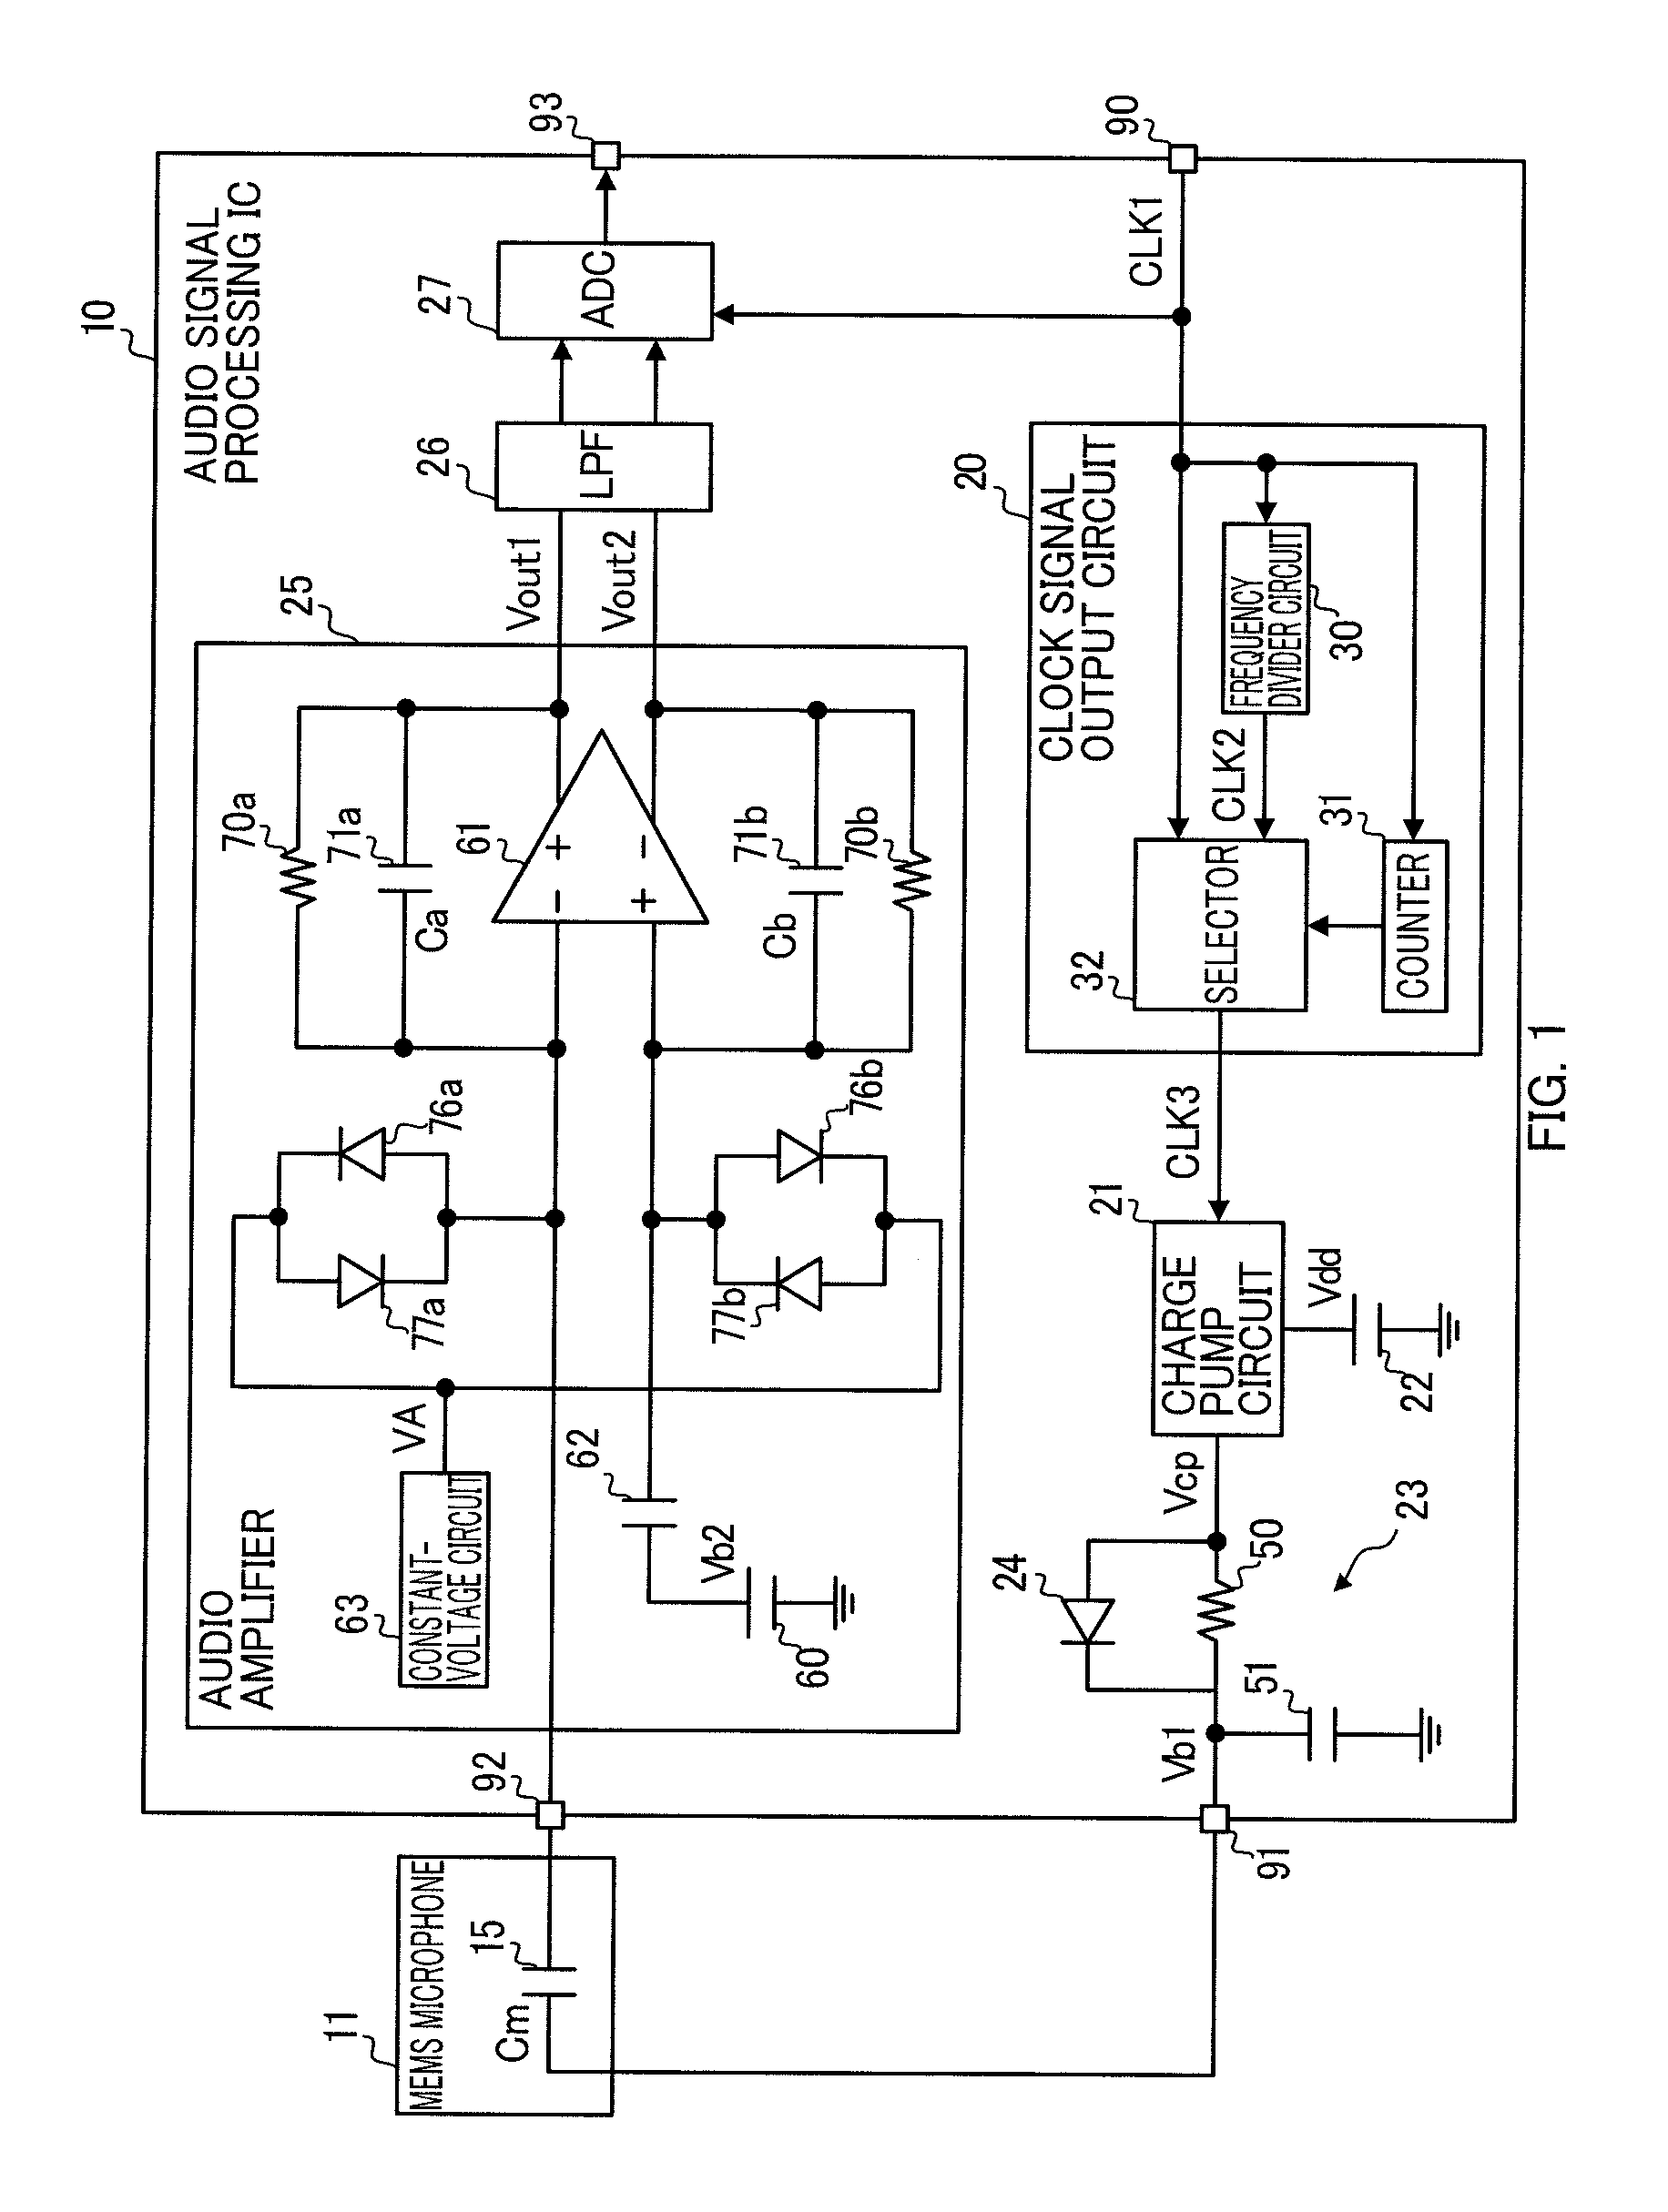 Charging circuit and amplifier